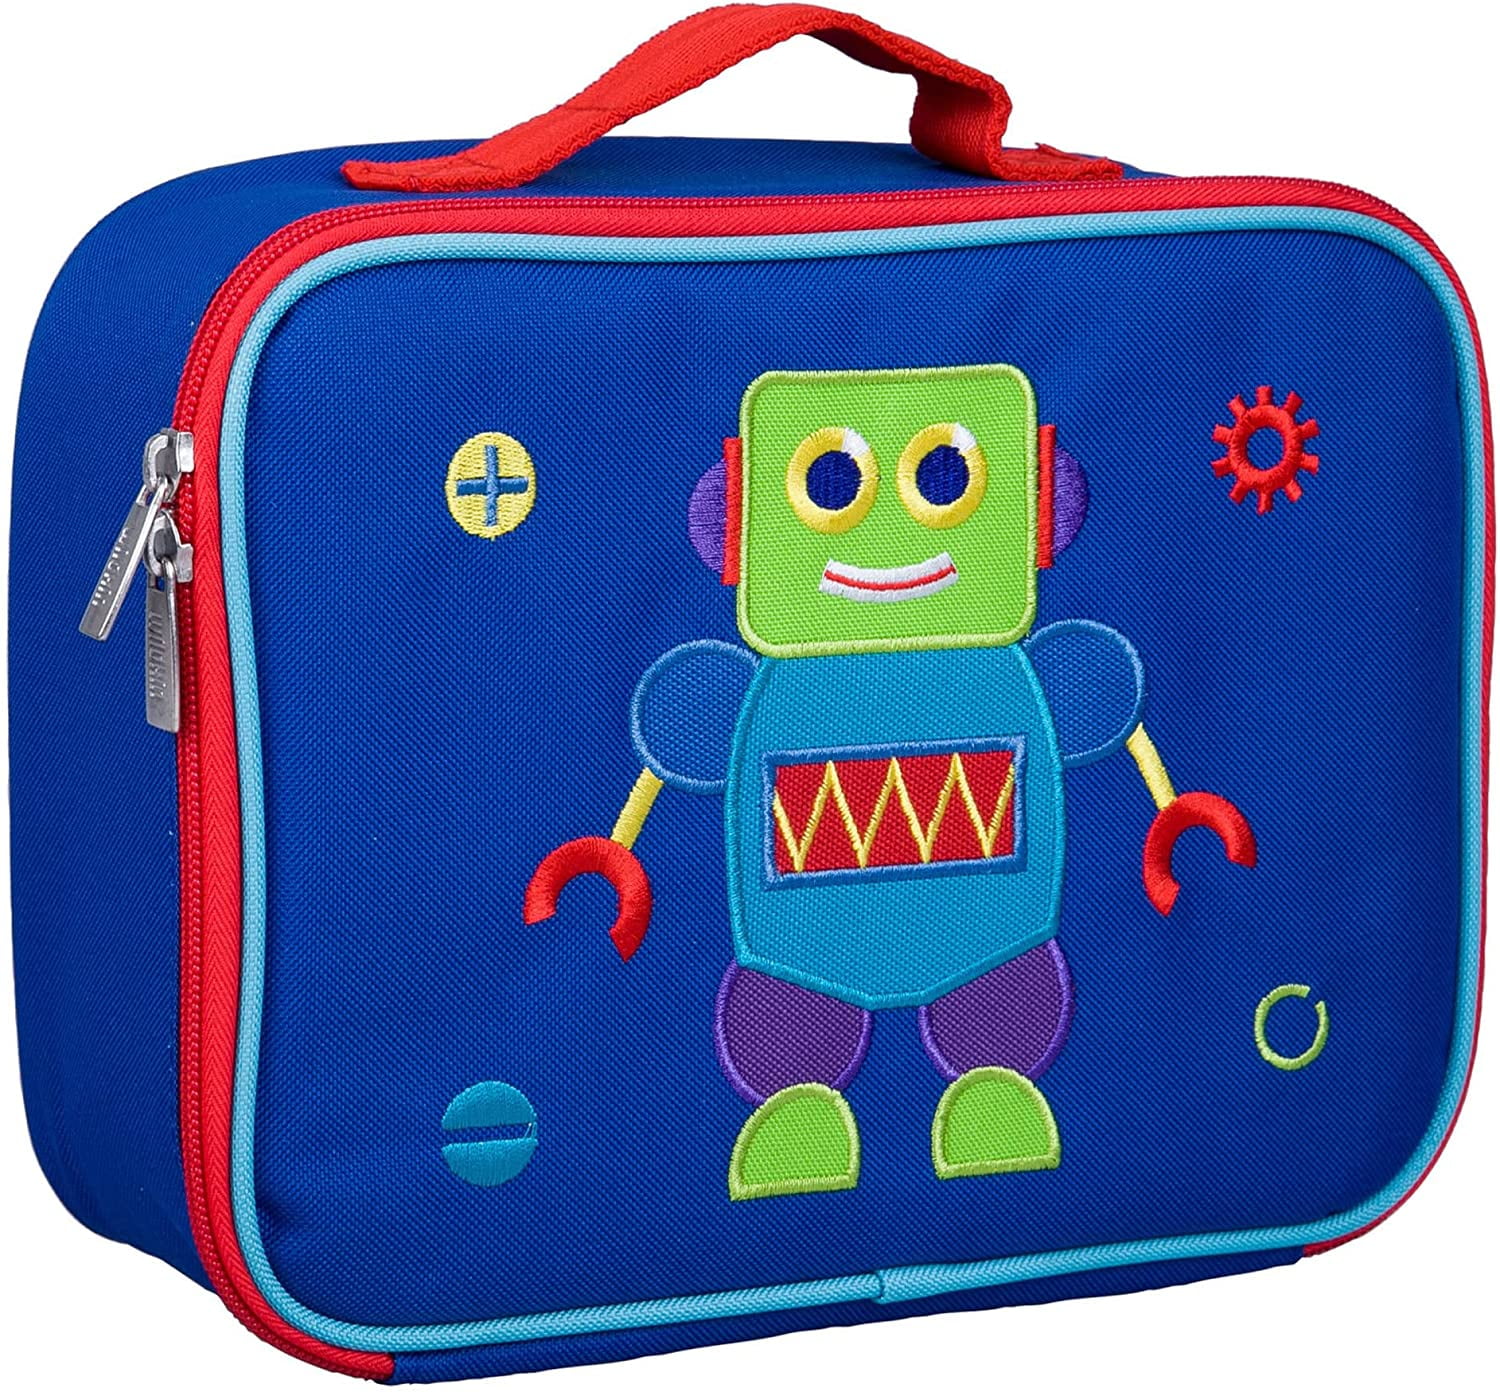 Mepal Lunch Box With Desired Name Personalized Lunch Box With a Blue  Tractor for Daycare / Kindergarten or School 